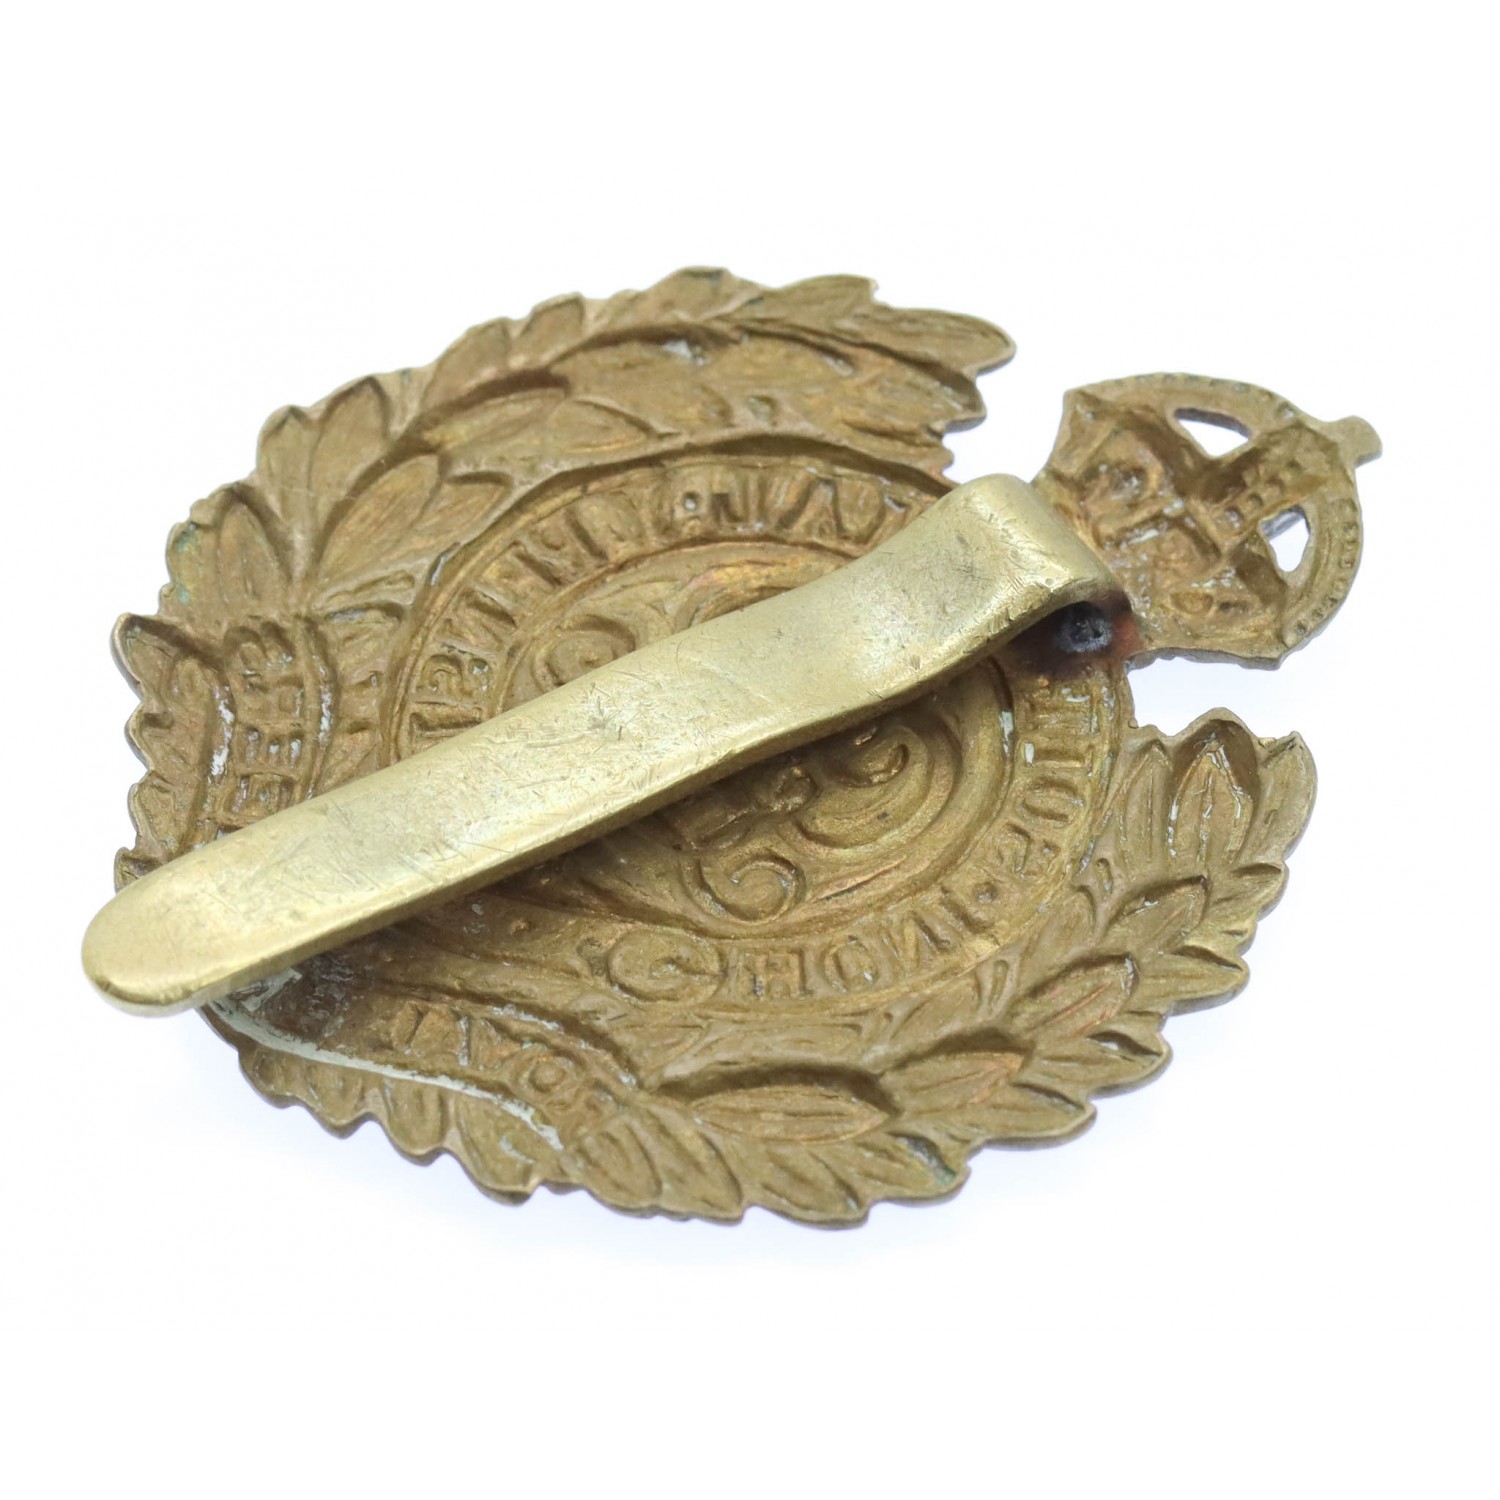 George V Royal Engineers Economy Cap Badge (Non Voided Centre)